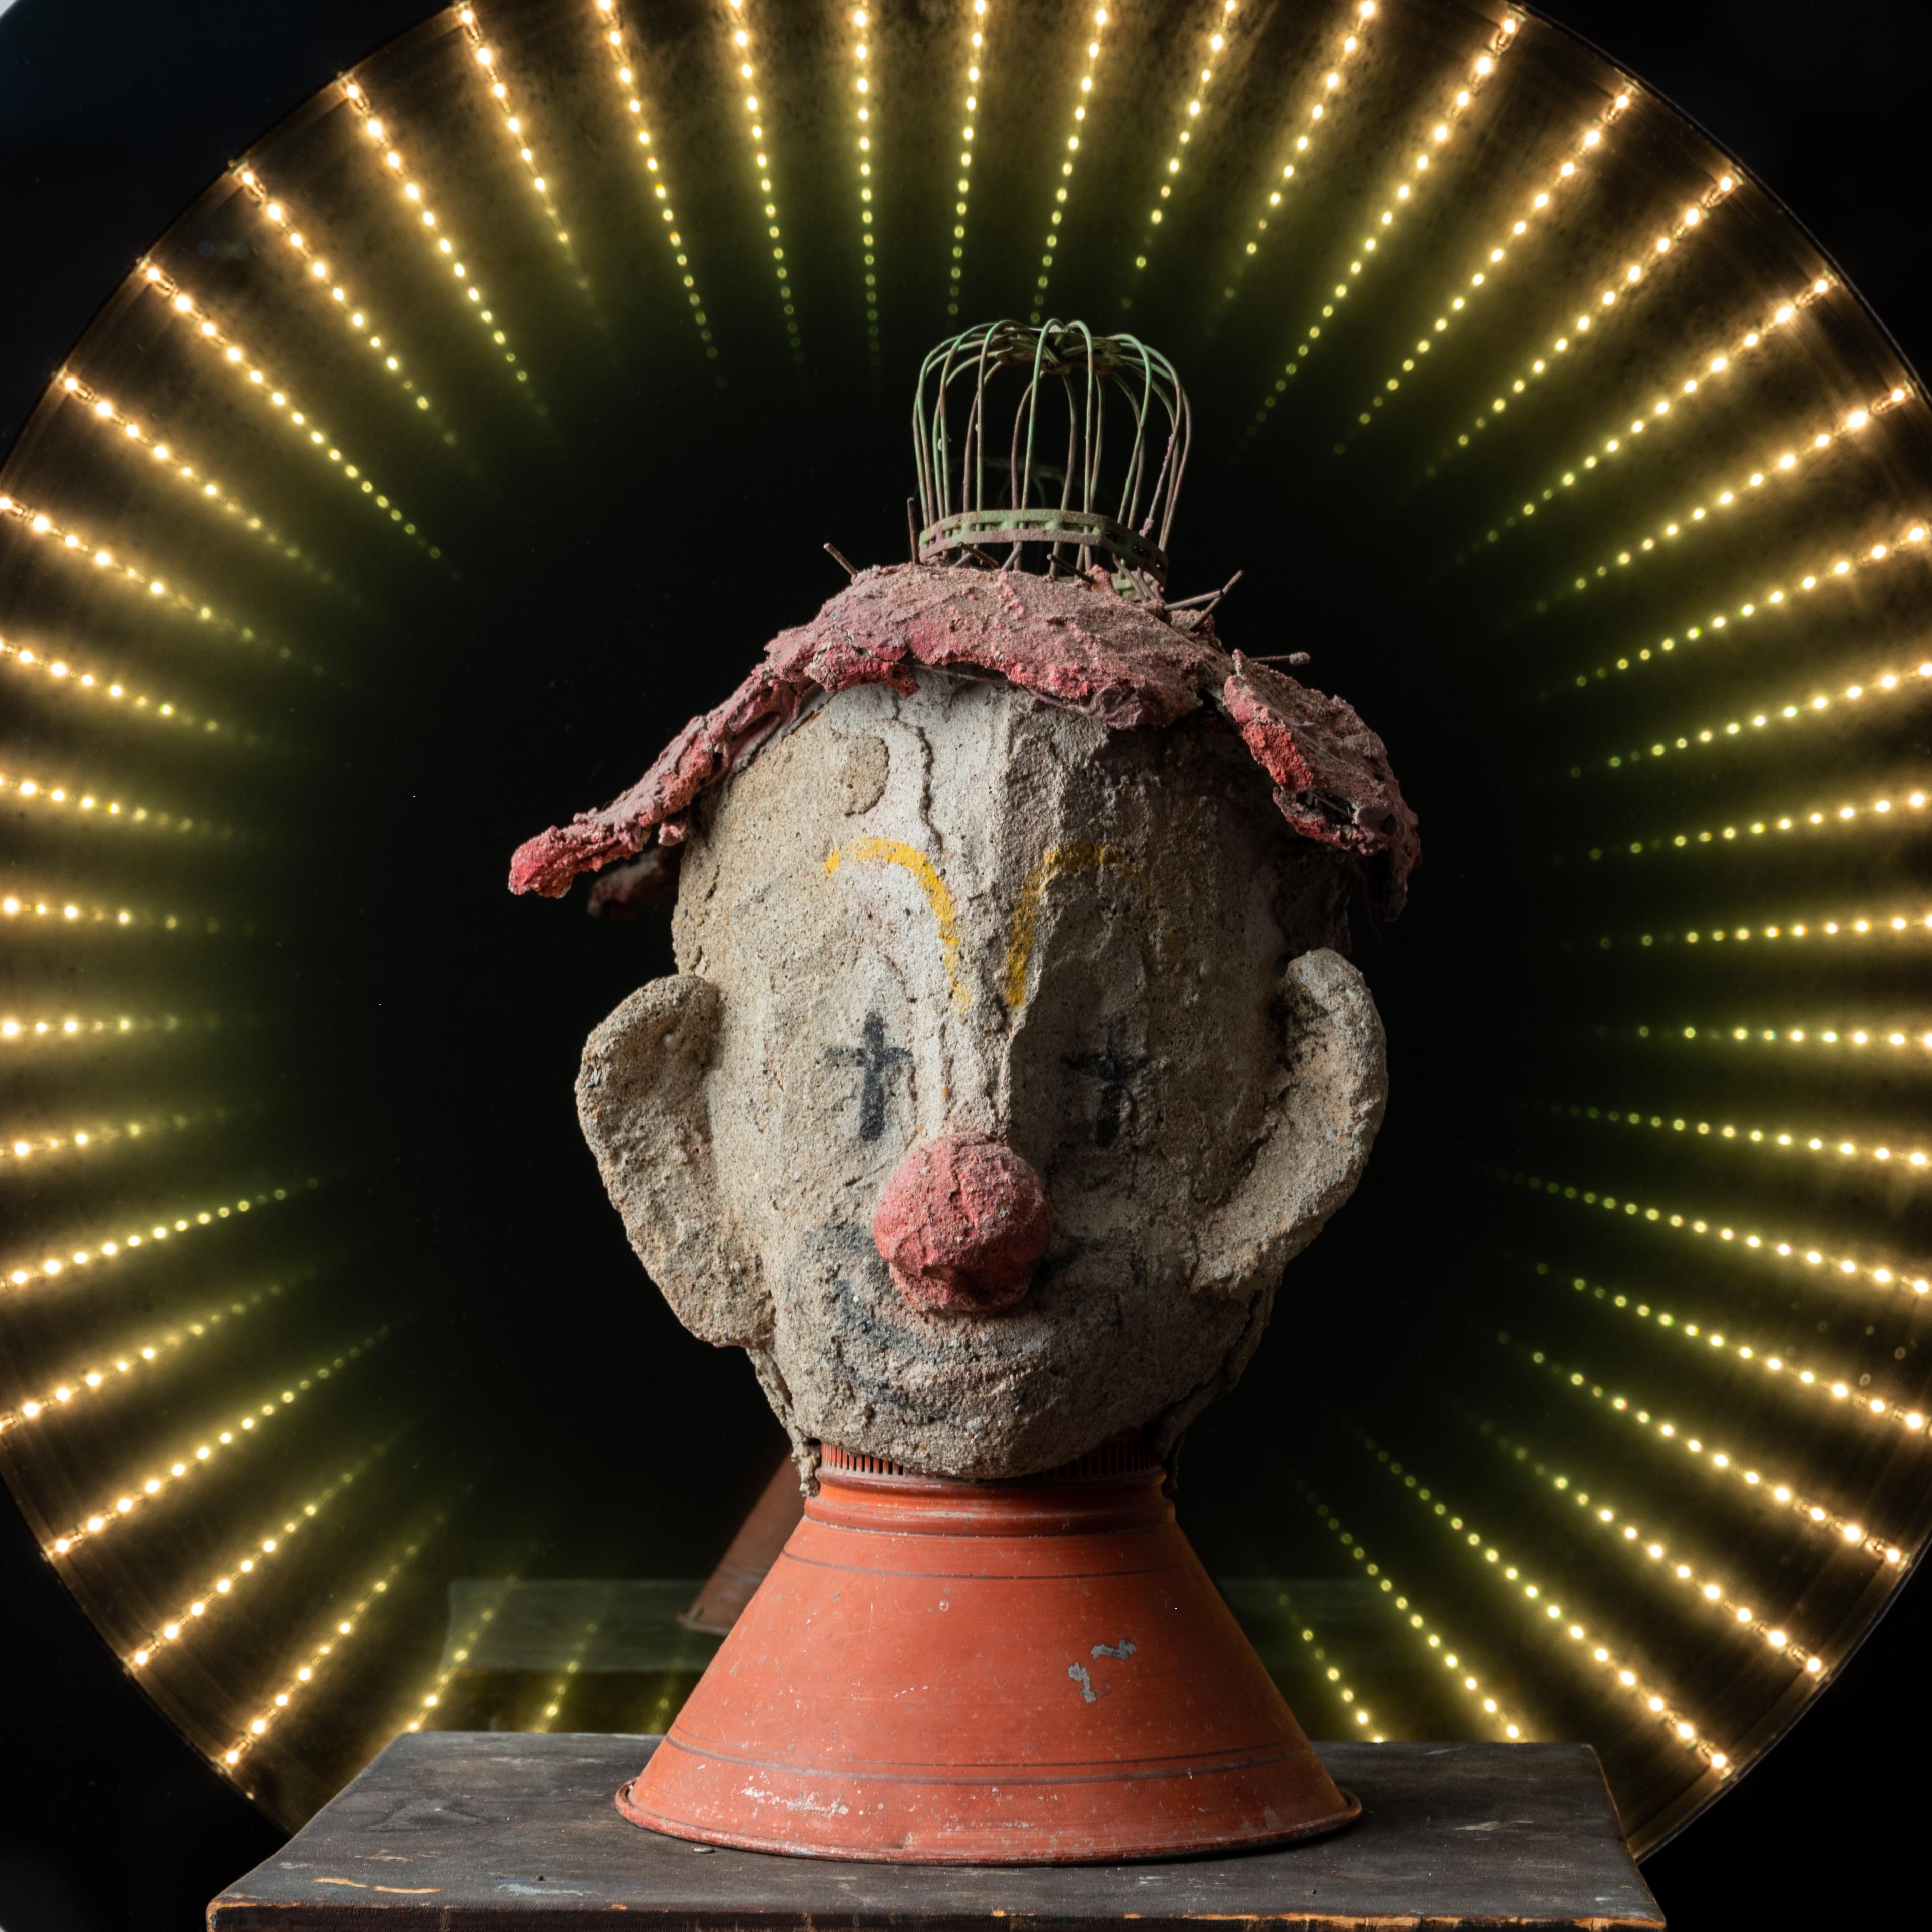 Aage Hogfeldt

(American, 1925-2014)

A clown bust made from concrete and found lamp parts. 

10 by 10 by 17 inches

In 1954 Aage Hogfeldt founded an artist colony in an old icehouse on Route 1 in Westbrook on the shore east of New Haven,